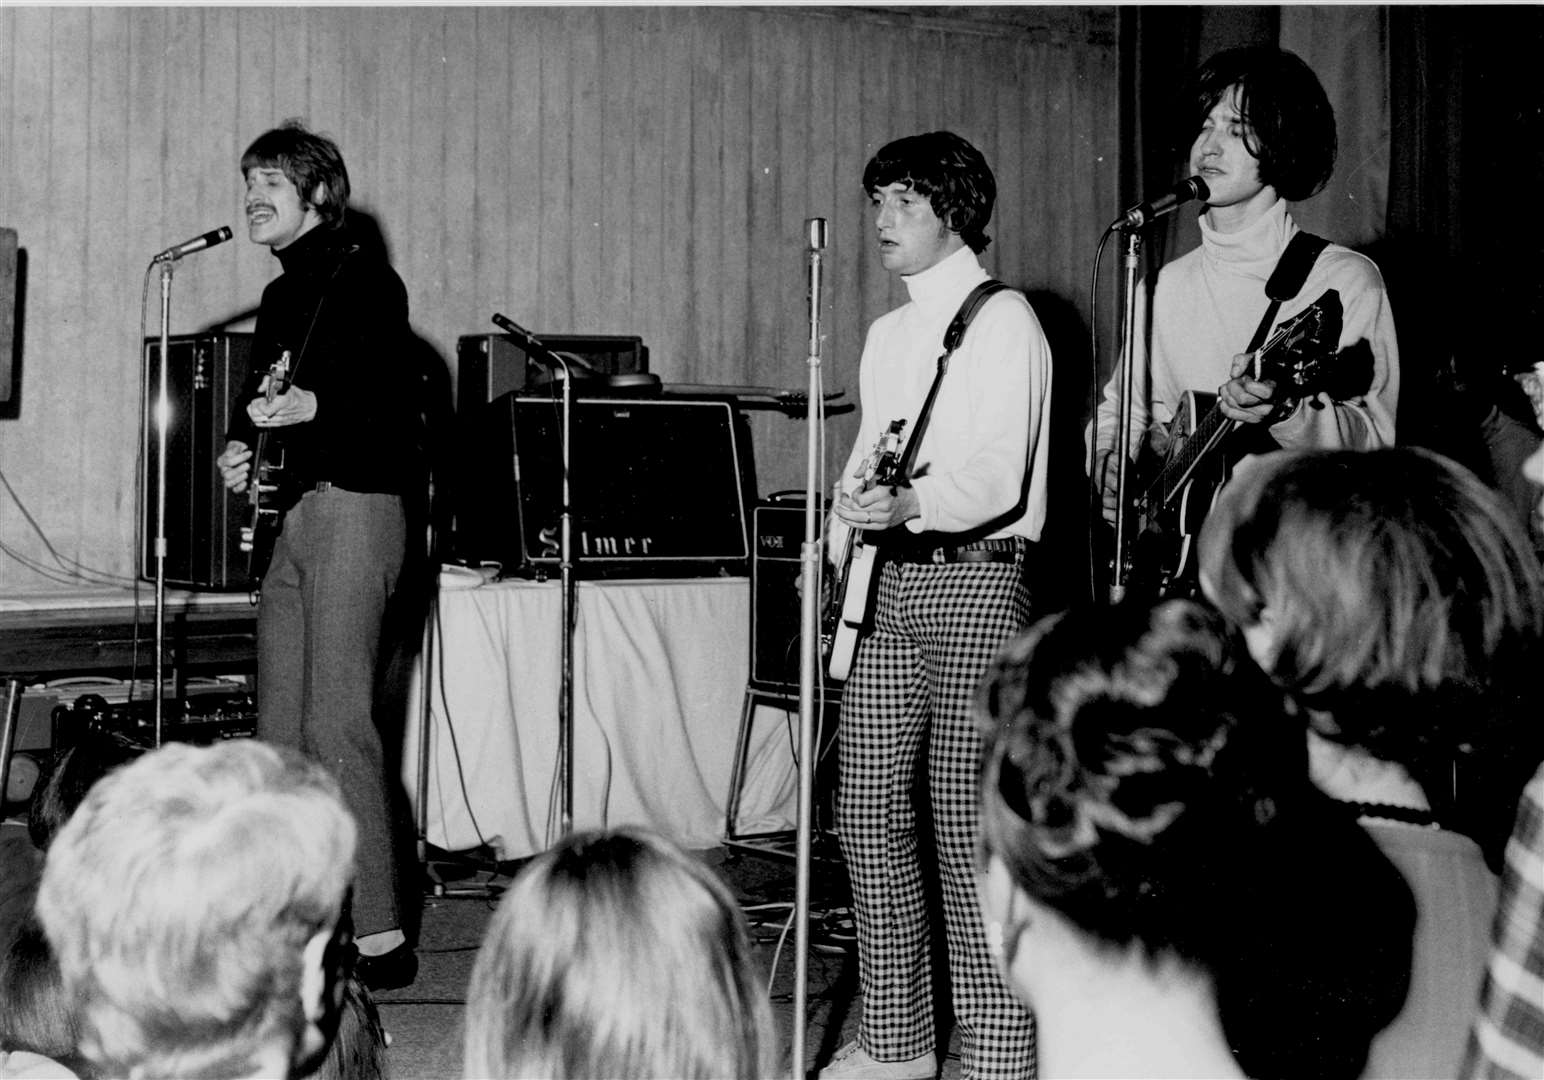 The Kinks were the main attraction of the 'rag ball' at the University of Kent in Canterbury in May 1966